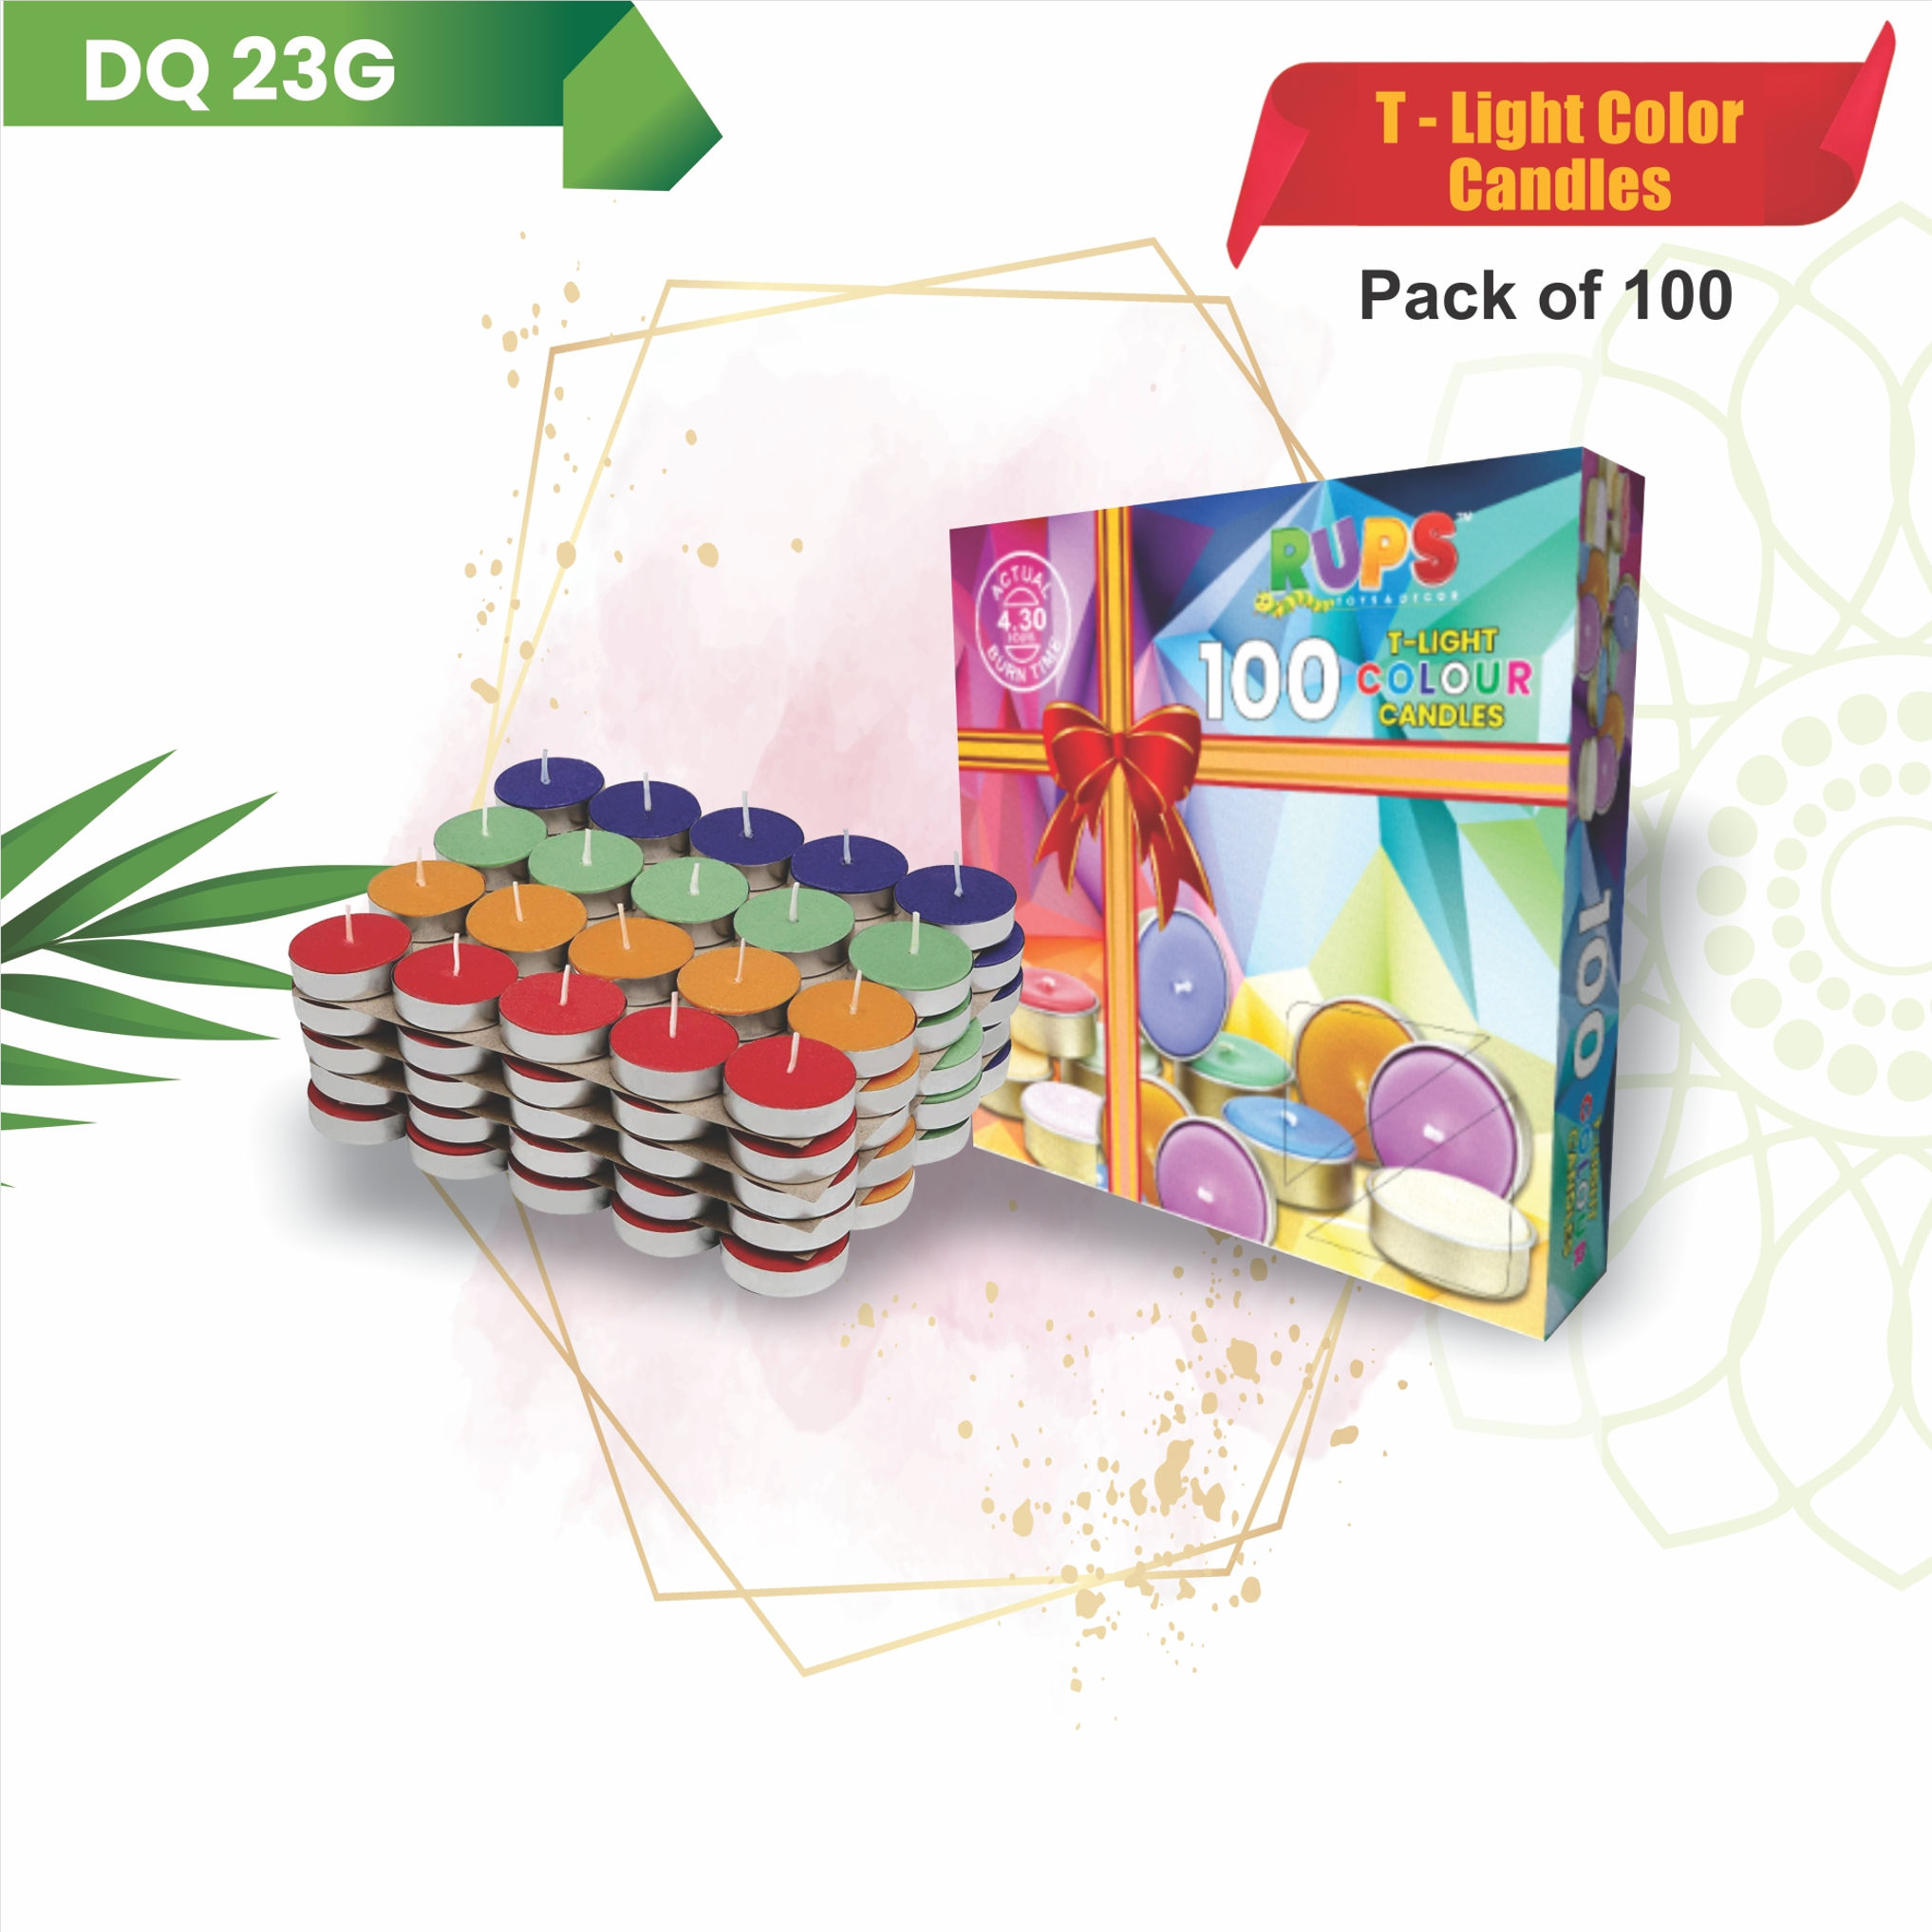 T-Light Color Candles Pack of 100|Festive Products|Diwali